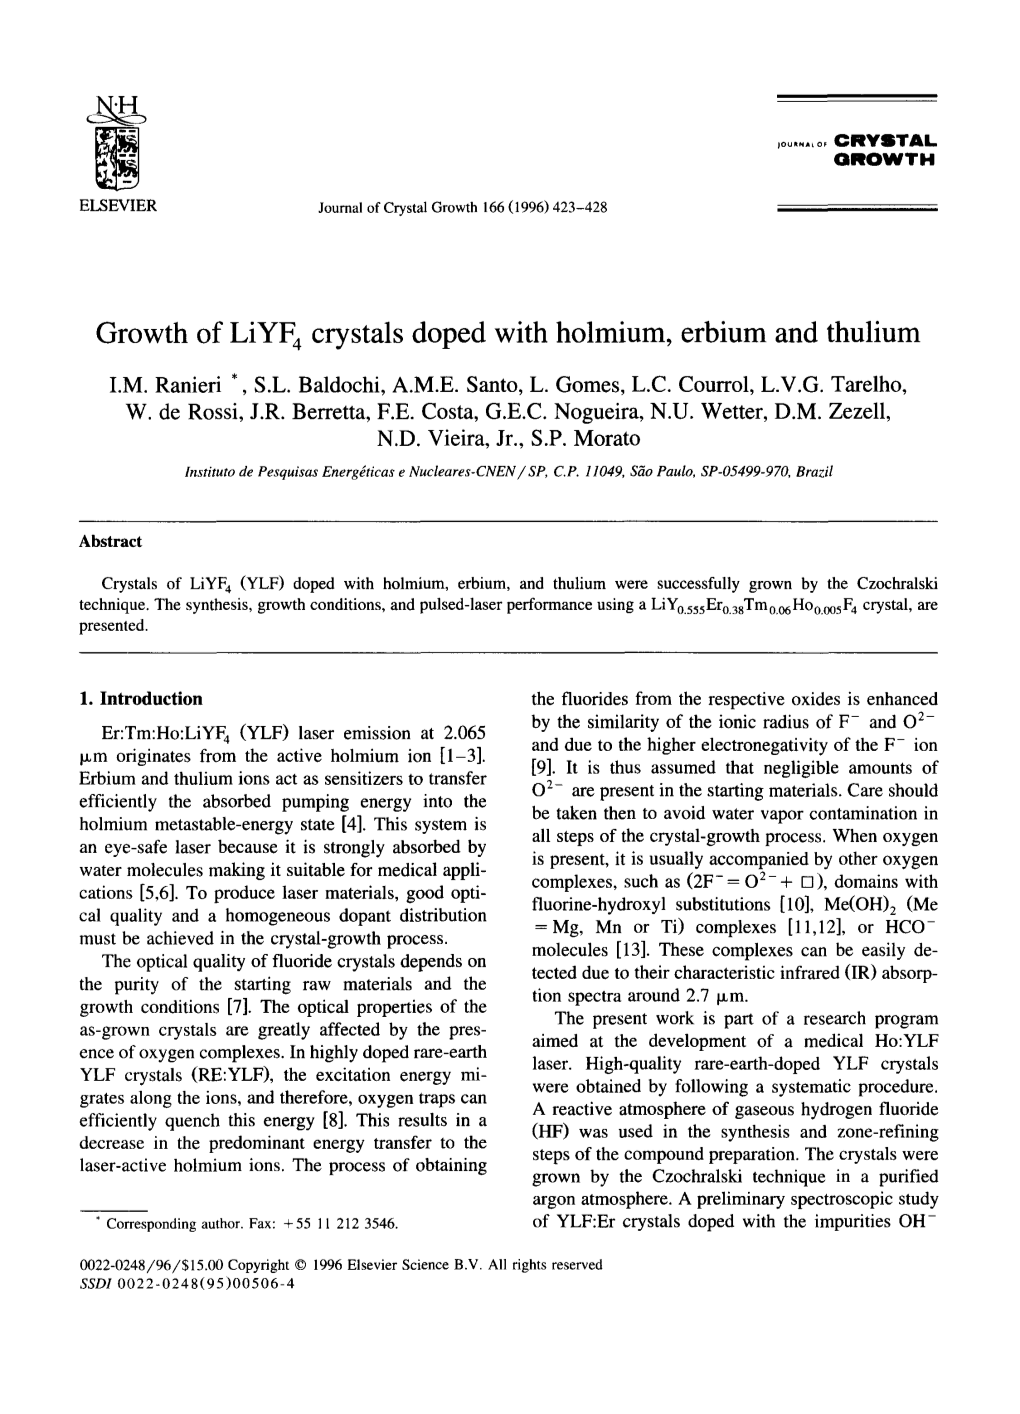 Growth of Liyf 4 Crystals Doped with Holmium, Erbium and Thulium